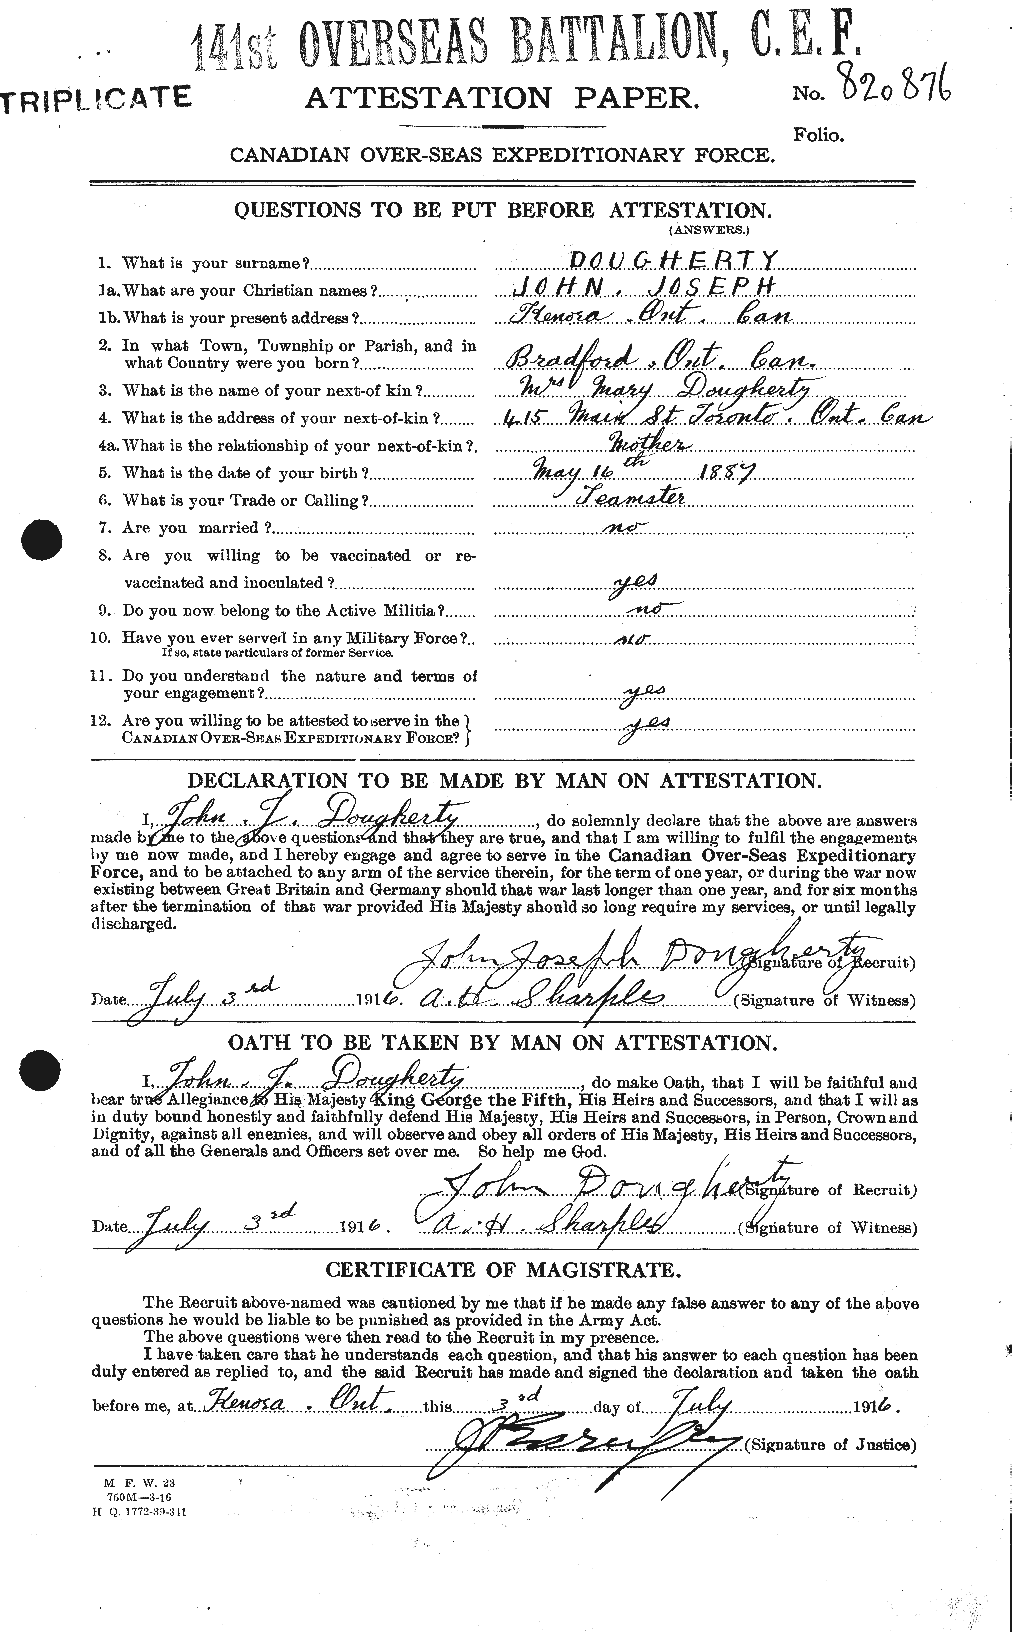 Personnel Records of the First World War - CEF 296153a